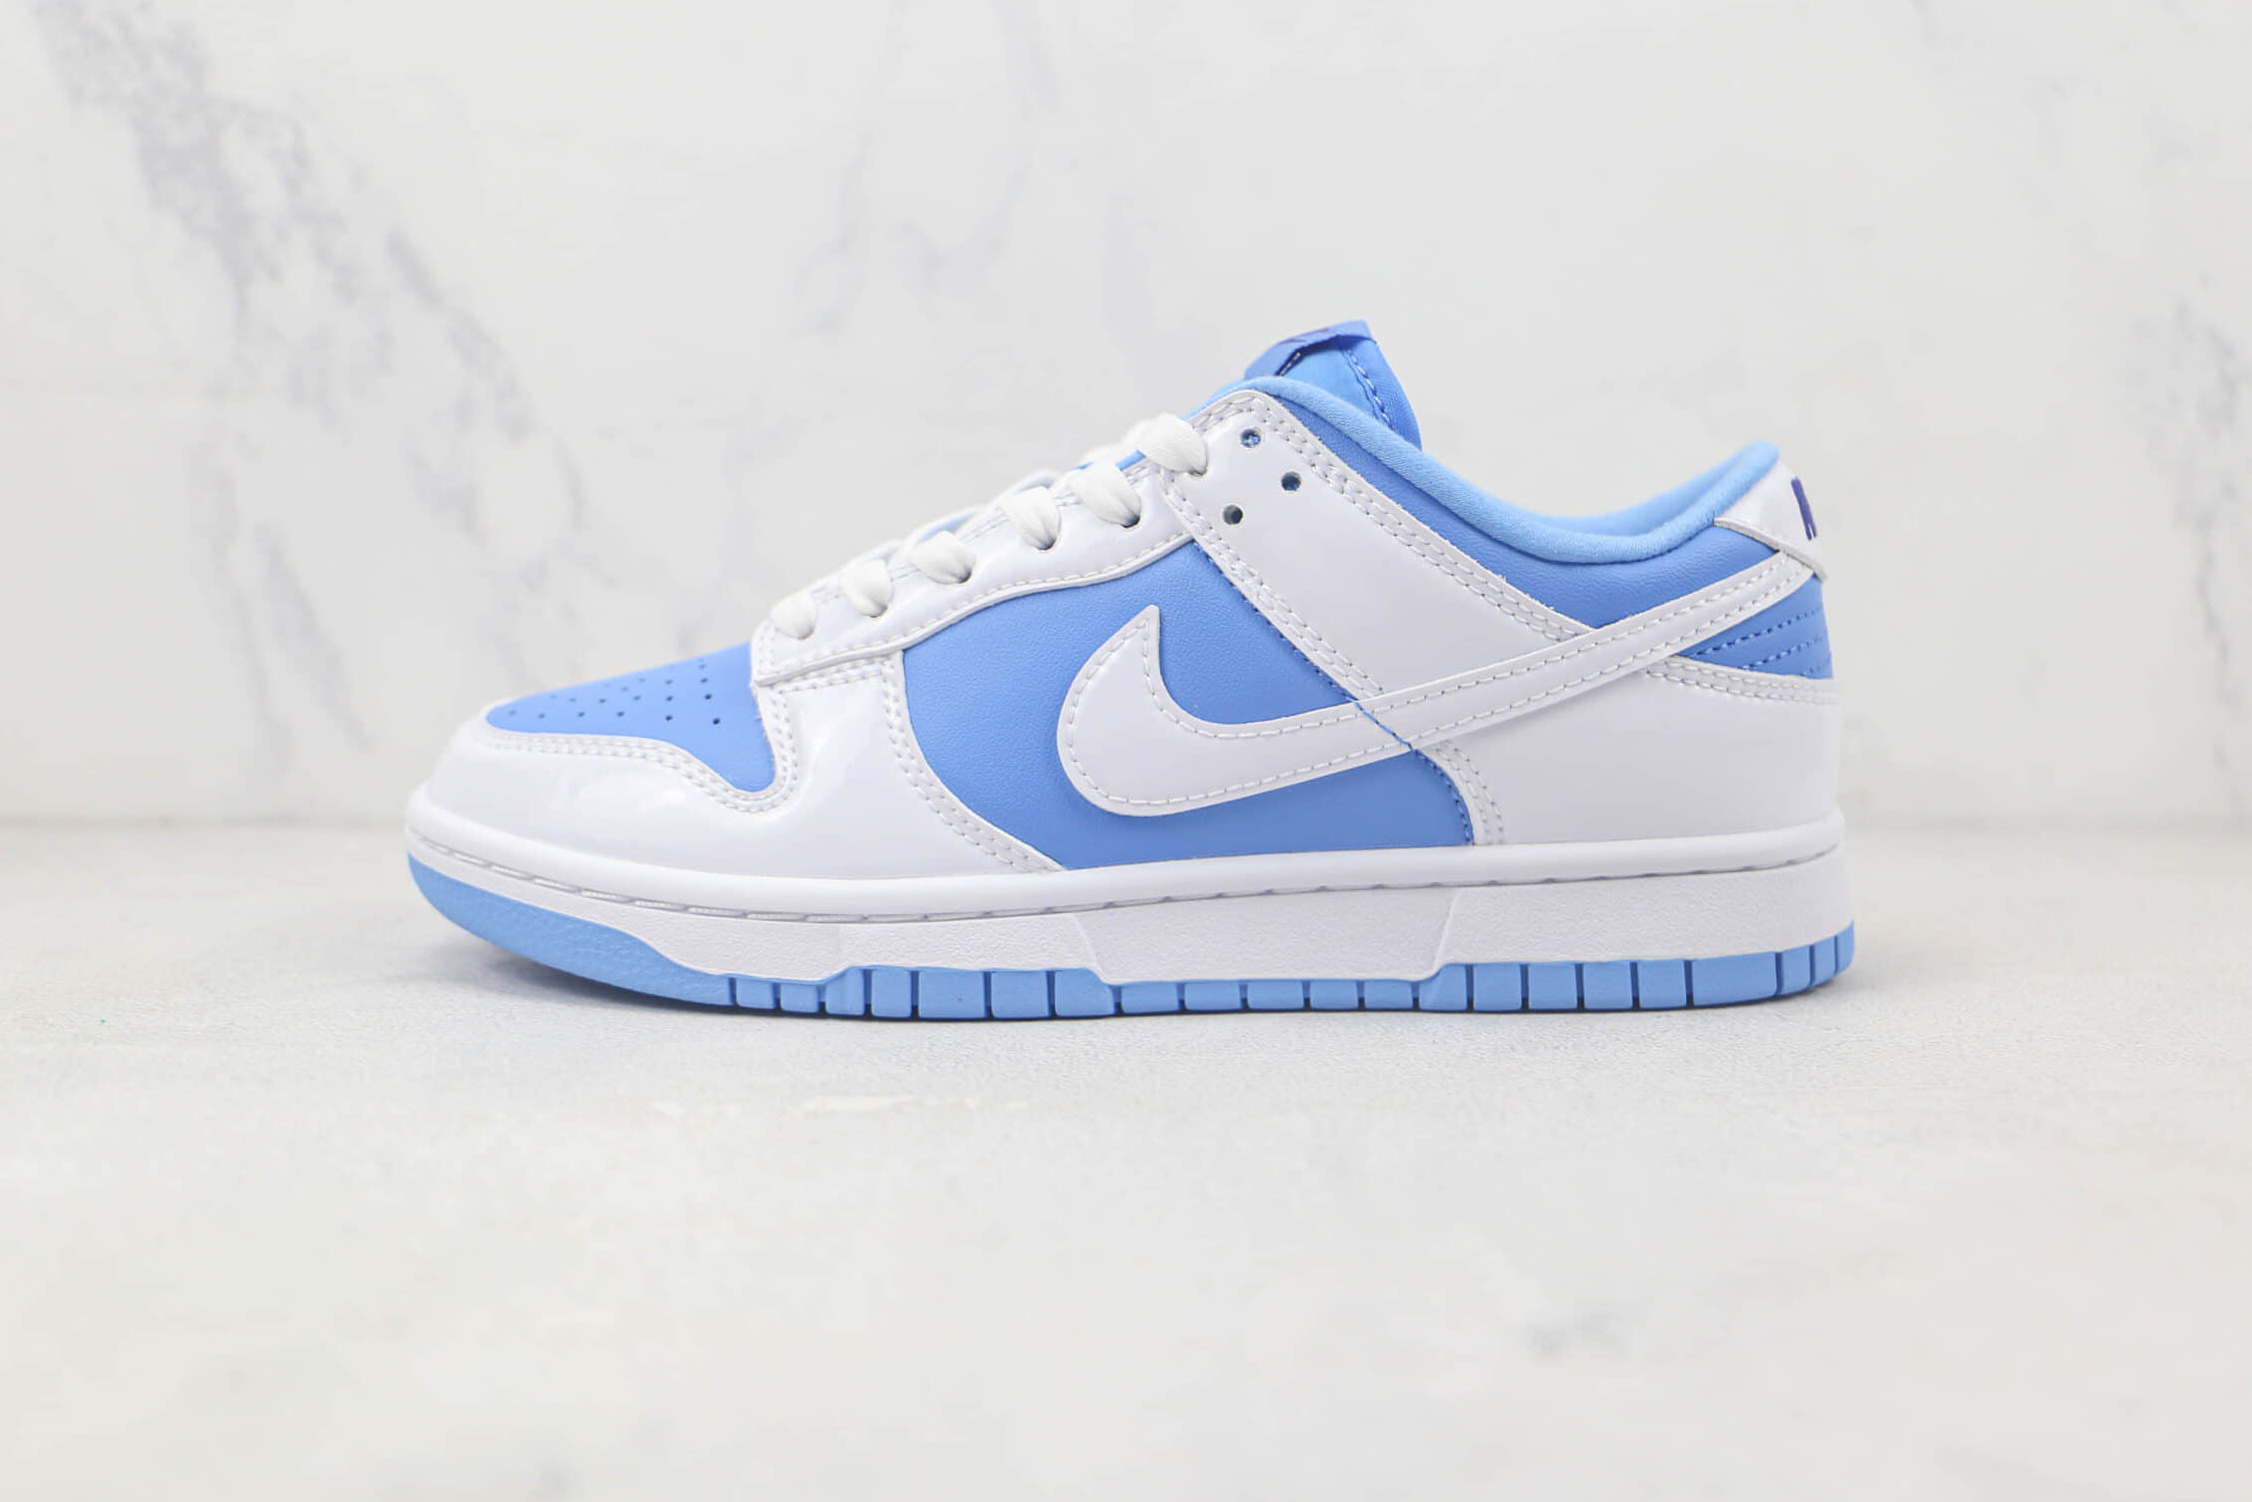 Nike Dunk Low 'Reverse UNC' DJ9955-101 - Limited Edition Retro Sneakers